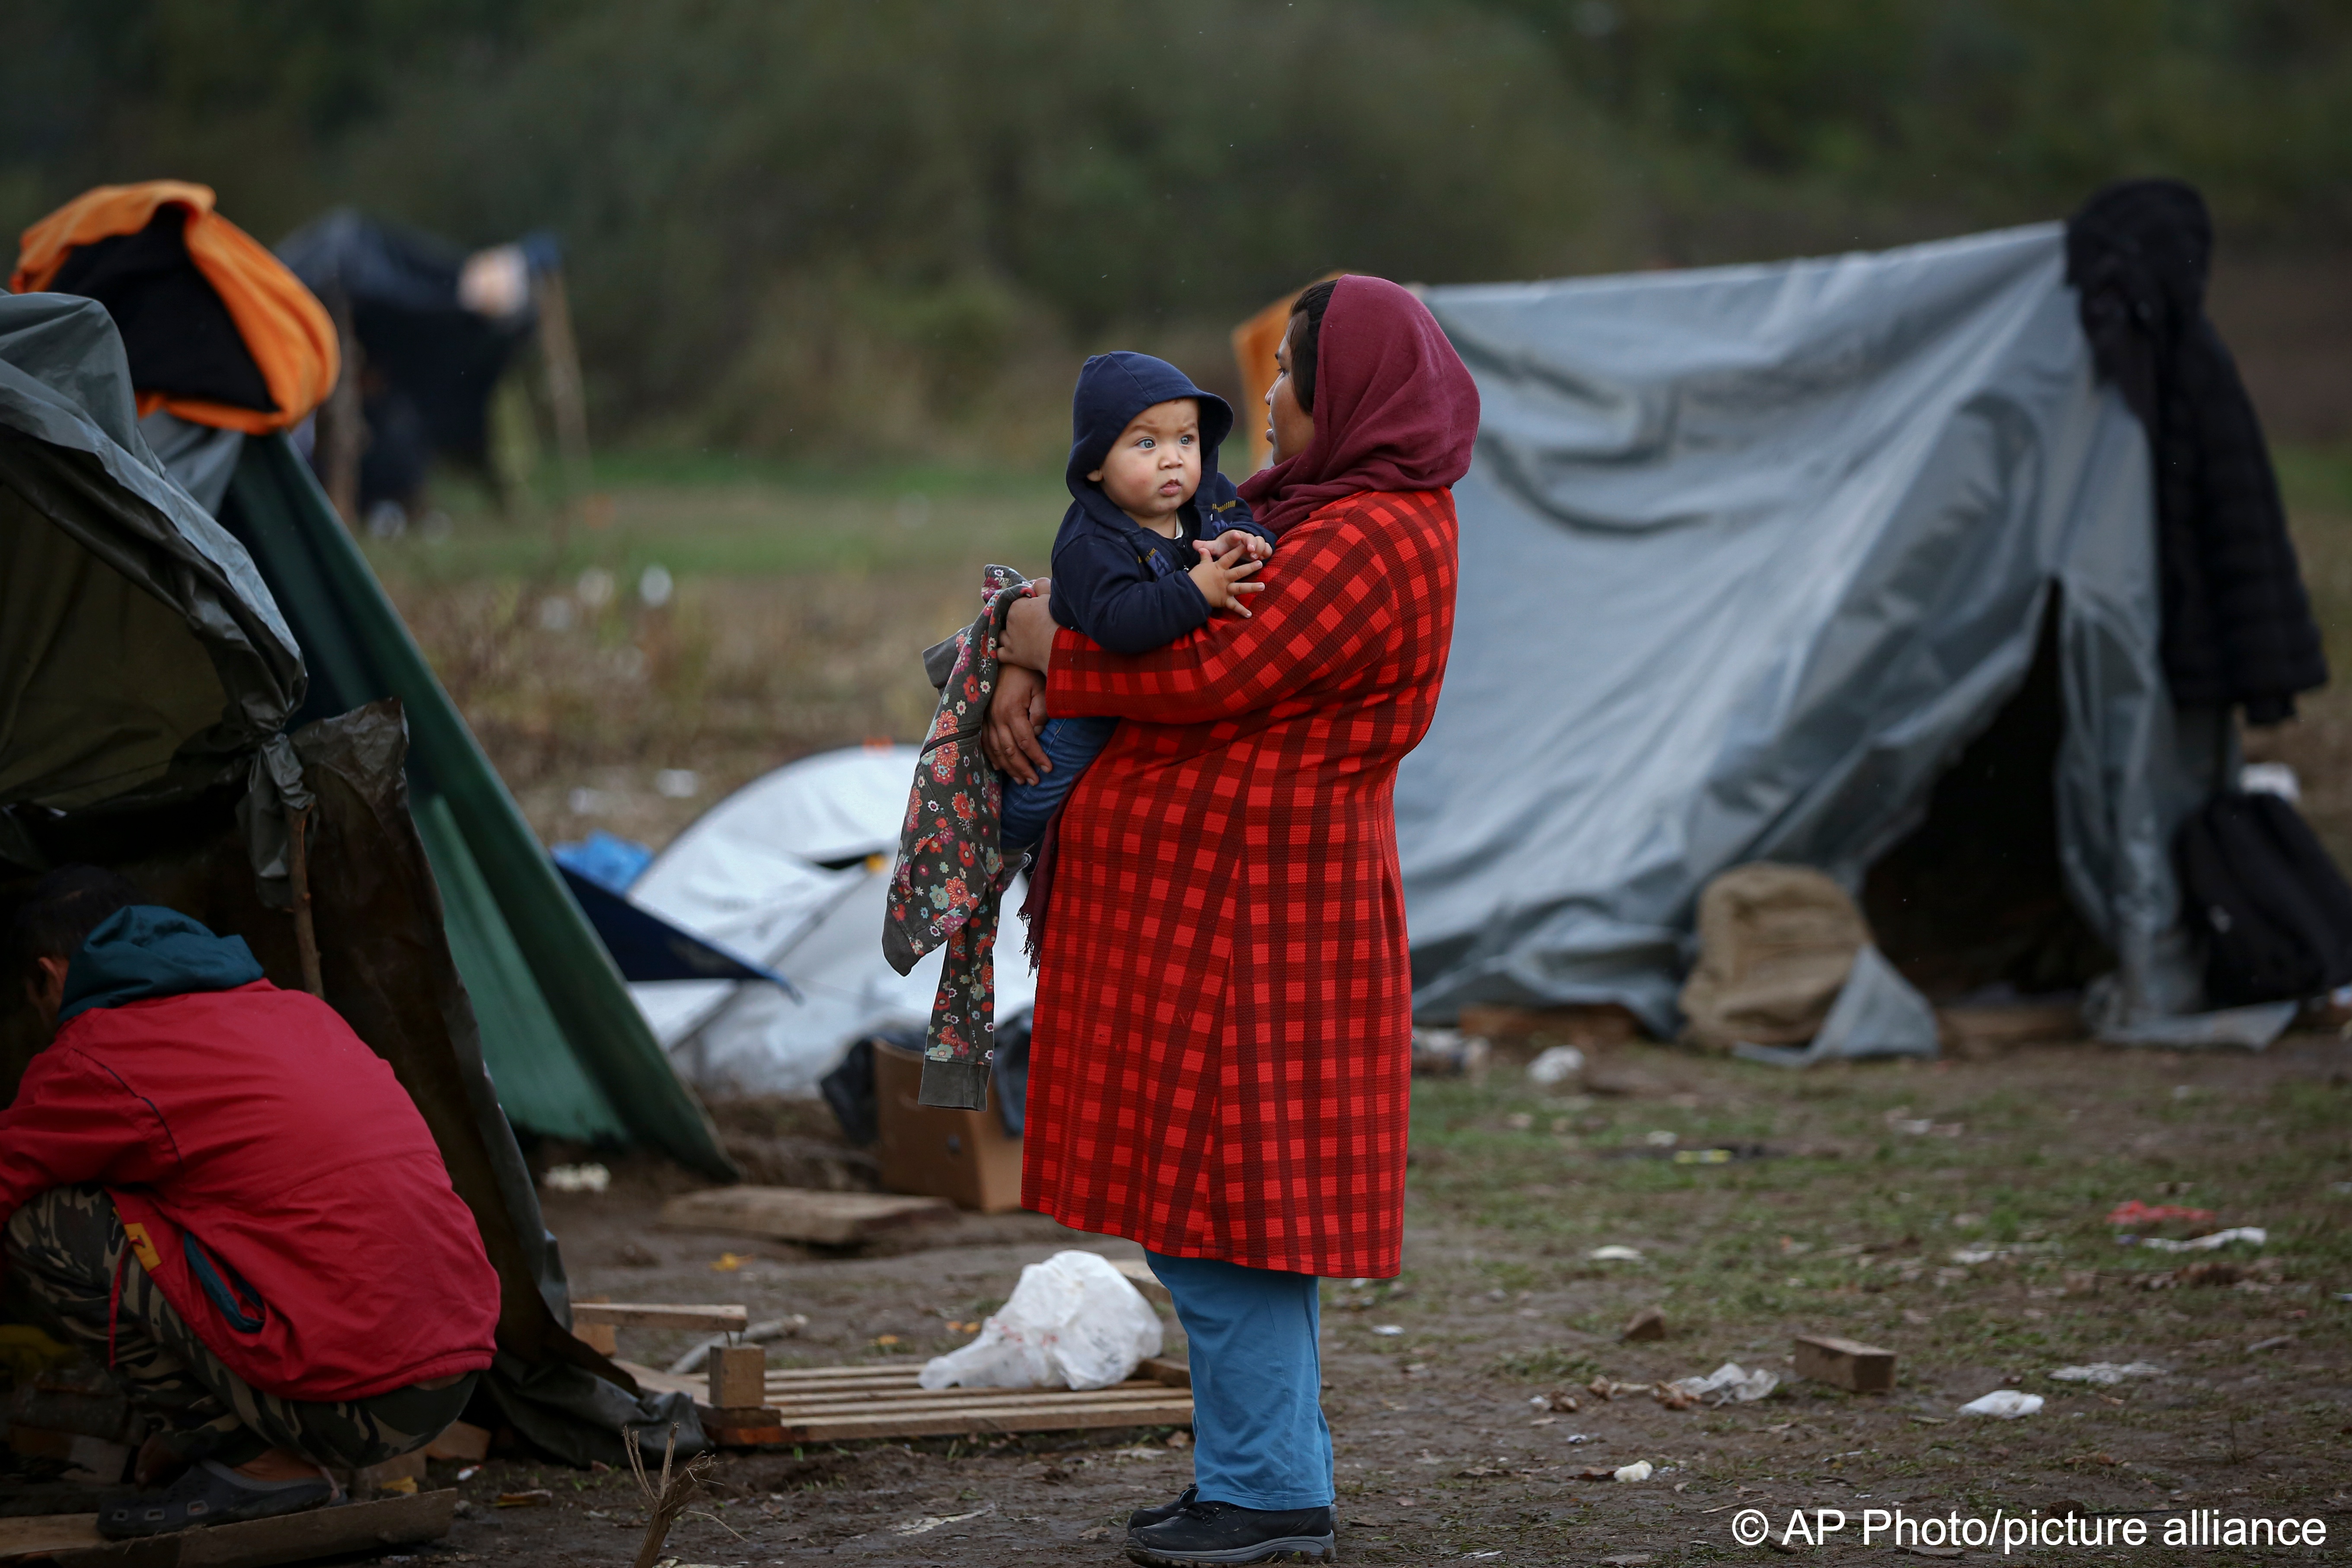 A migrant woman holds a baby at a makeshift camp housing migrants mostly from Afghanistan, in Velika Kladusa, Bosnia, 12 October 2021 (photo: AP Photo)